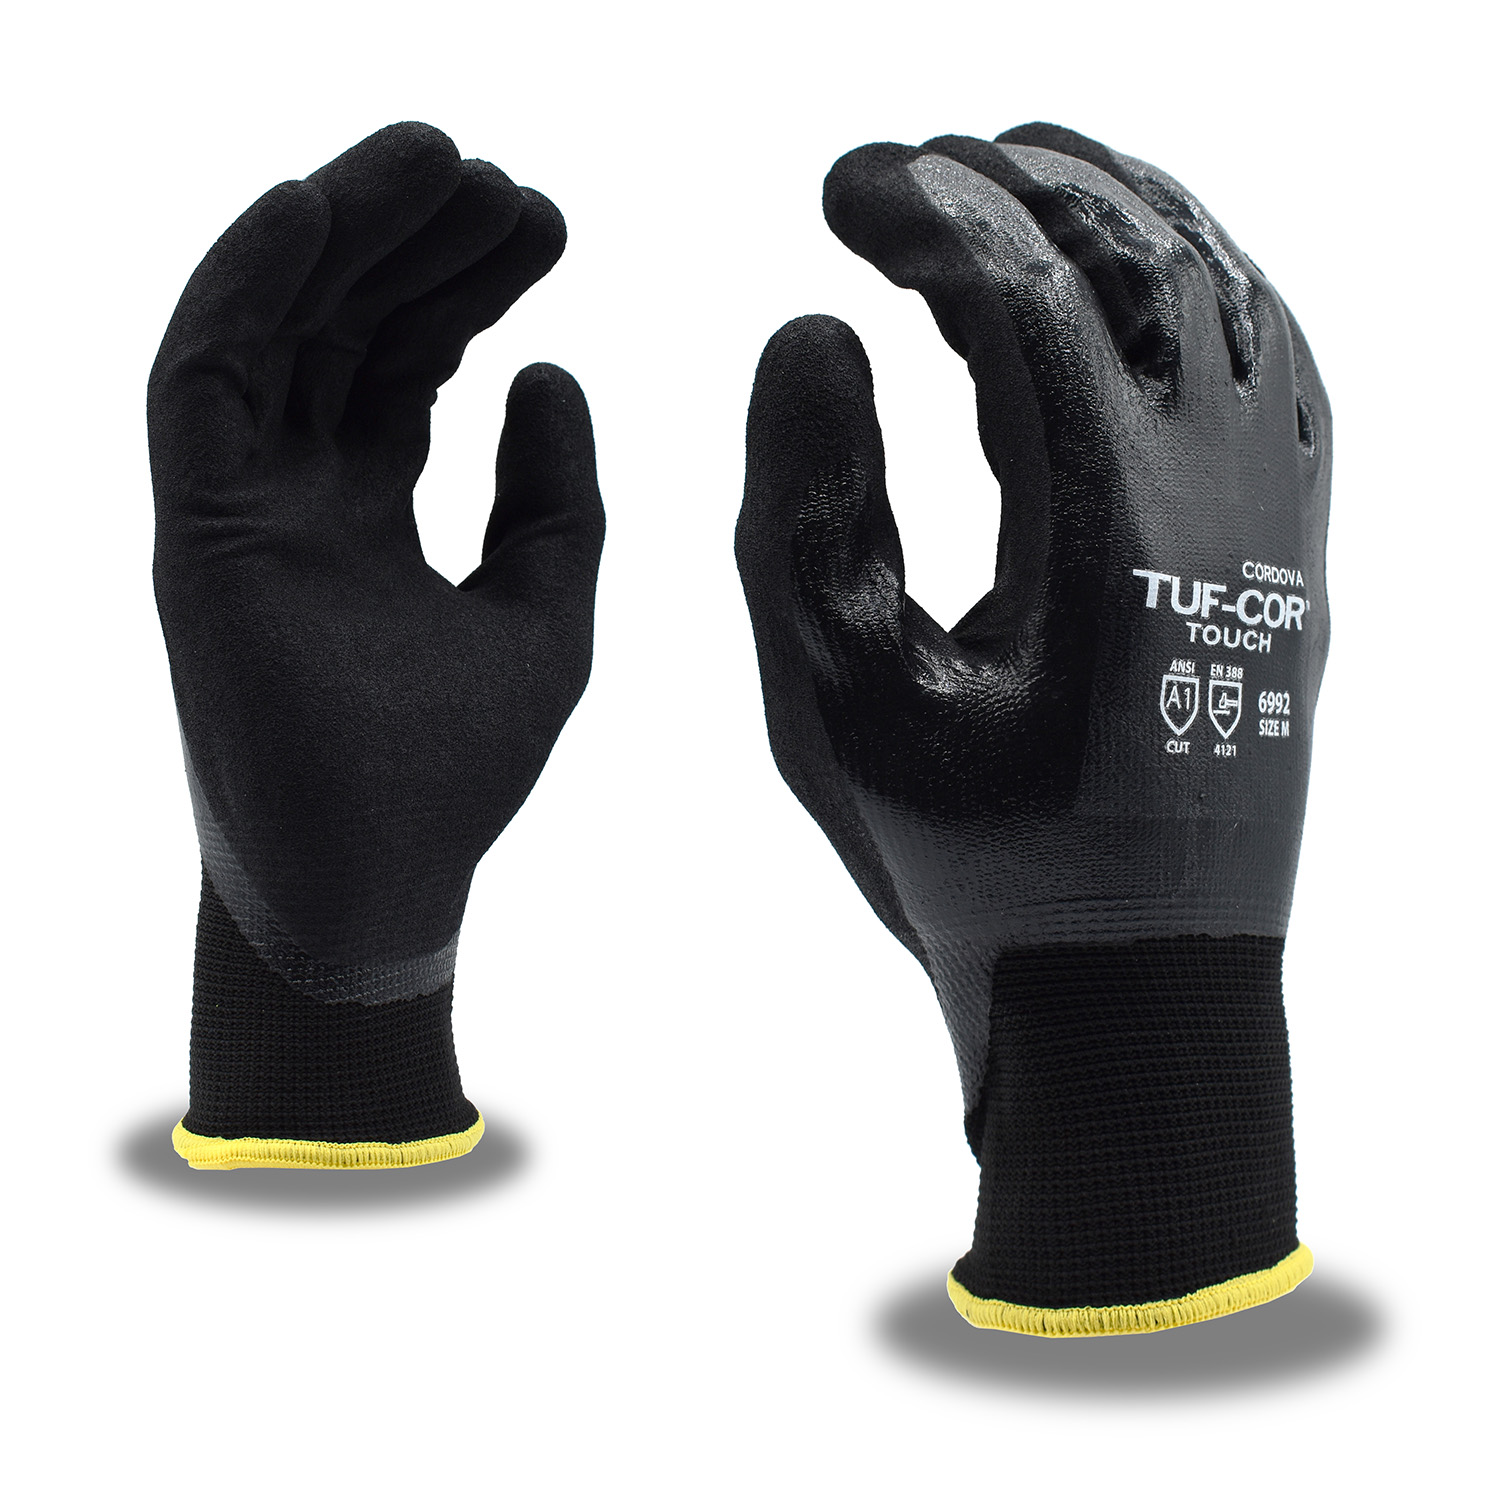 Tuf-Cor Touch™, Nitrile, A1: #6992